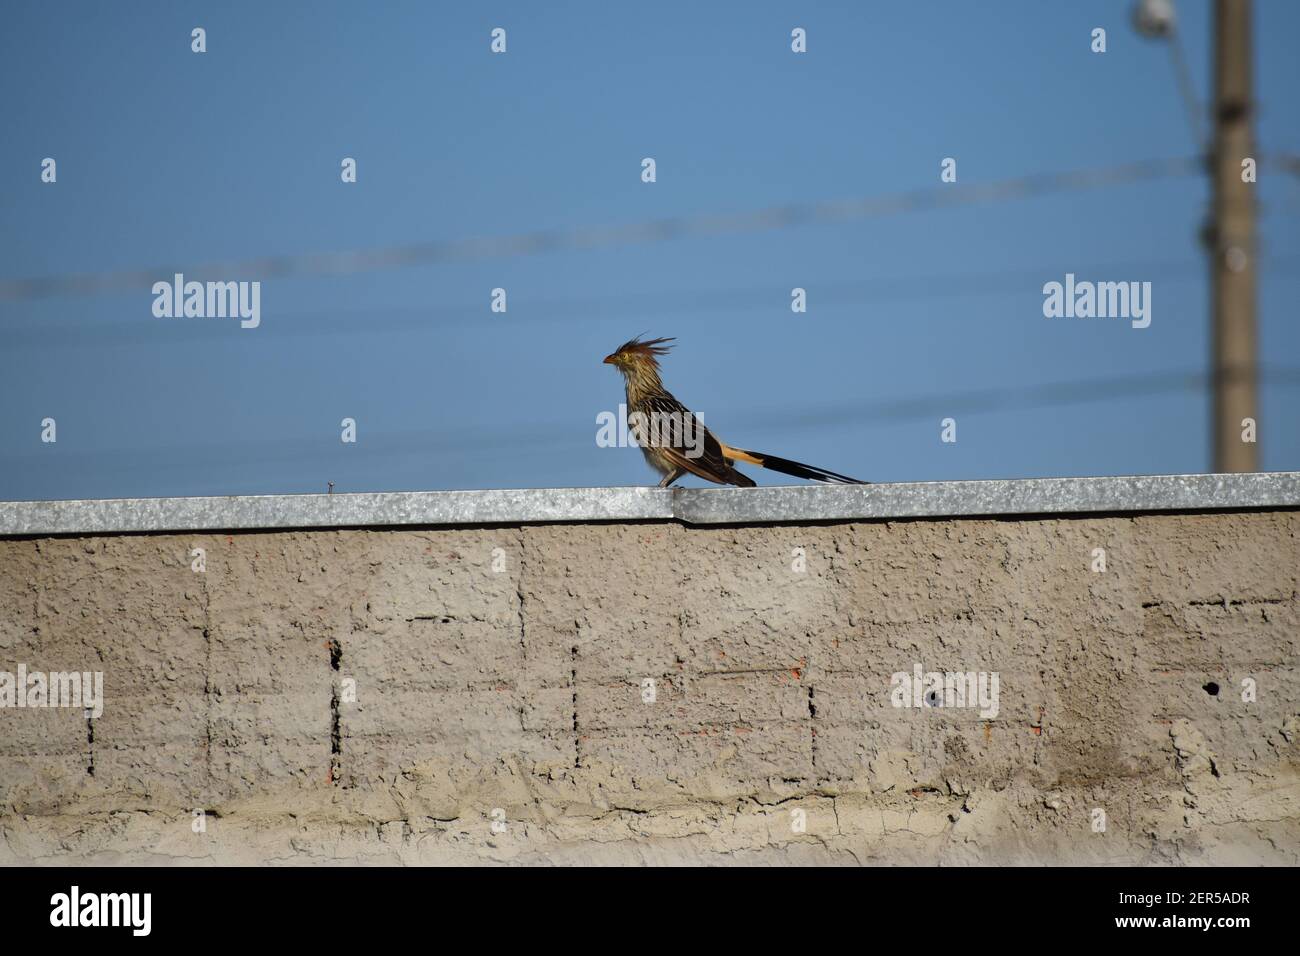 Side view of Brazilian yellow bird (guira cuckoo) with high crest and red beak admiring the blue sky in a brick cemented wall with wires in the back. Stock Photo